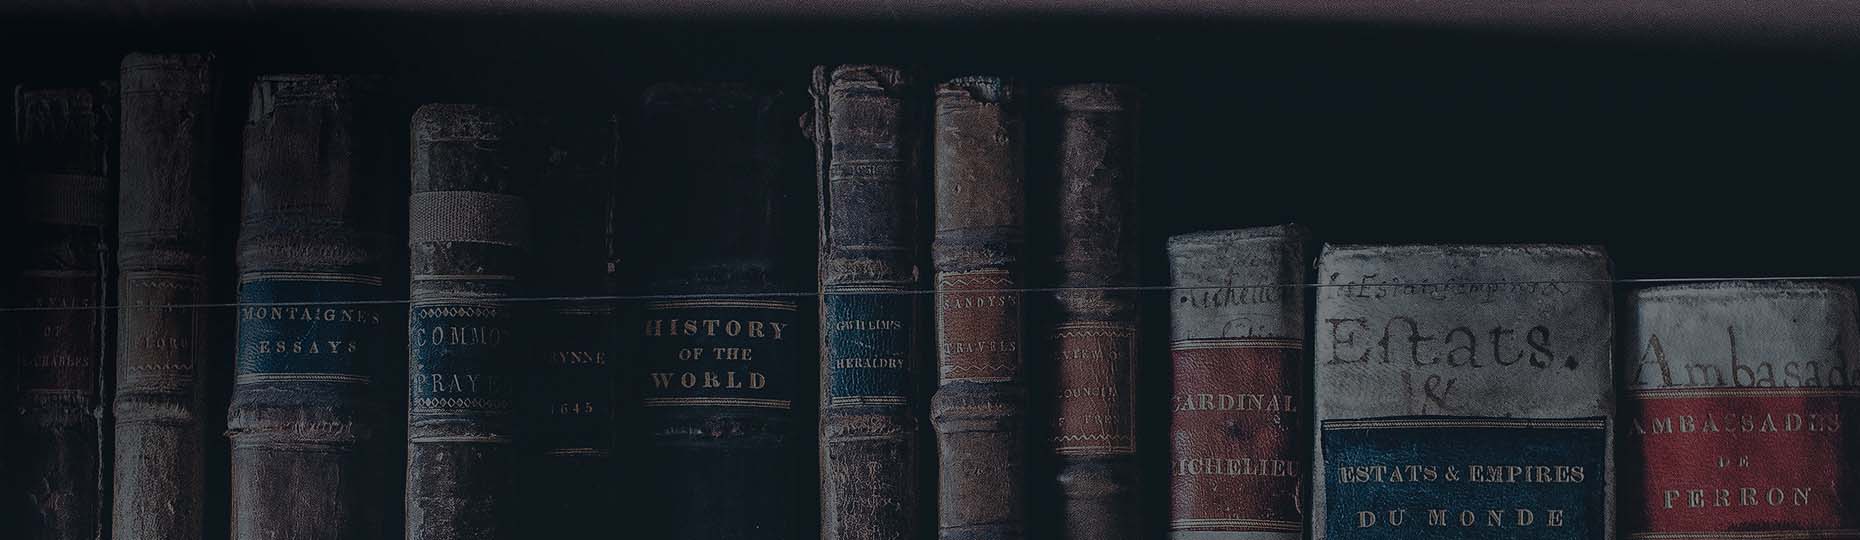 Old books are standing side by side